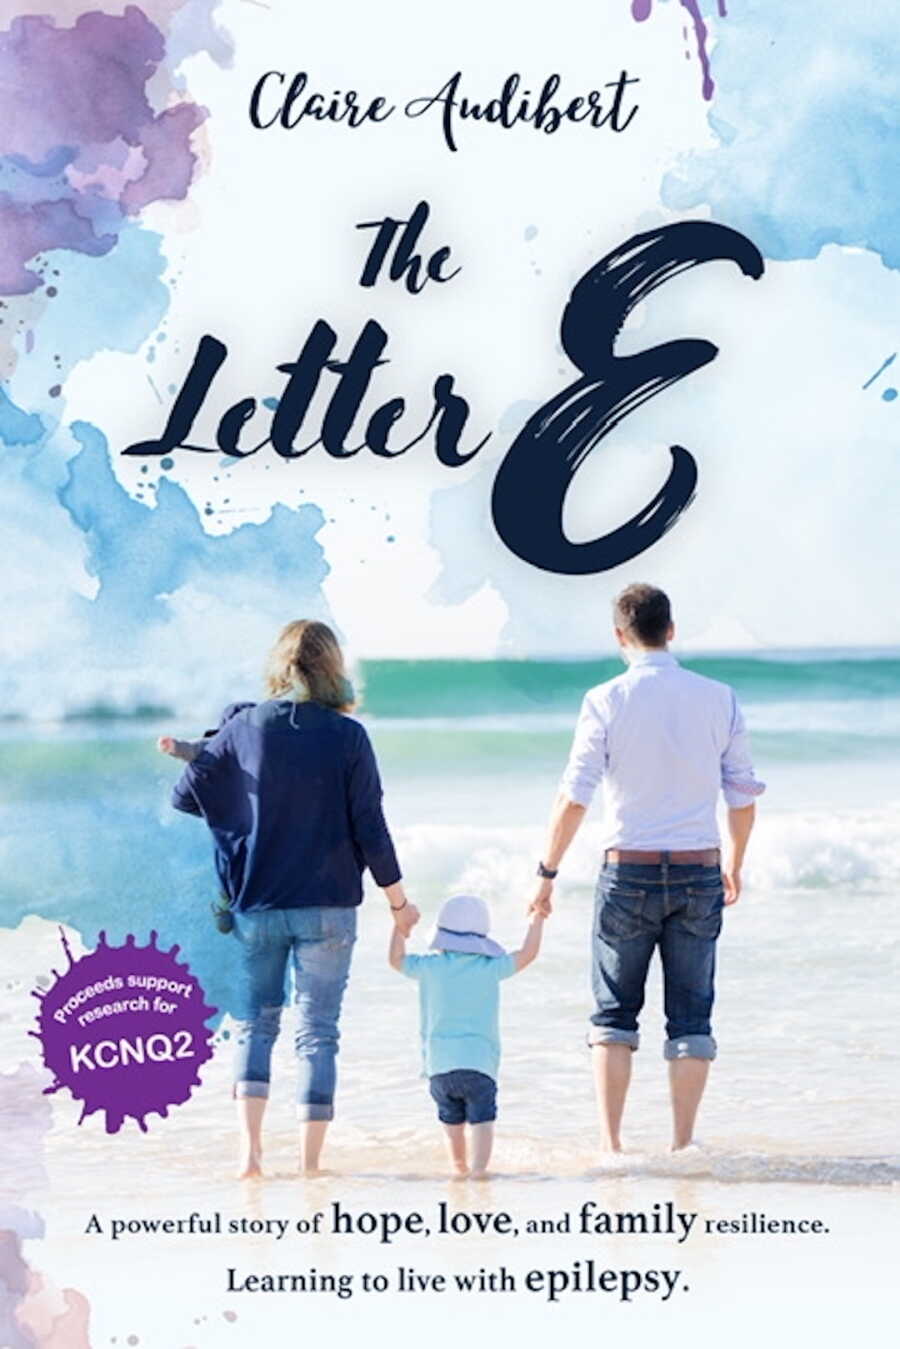 cover of book written by mom of child with rare form of genetic epilepsy